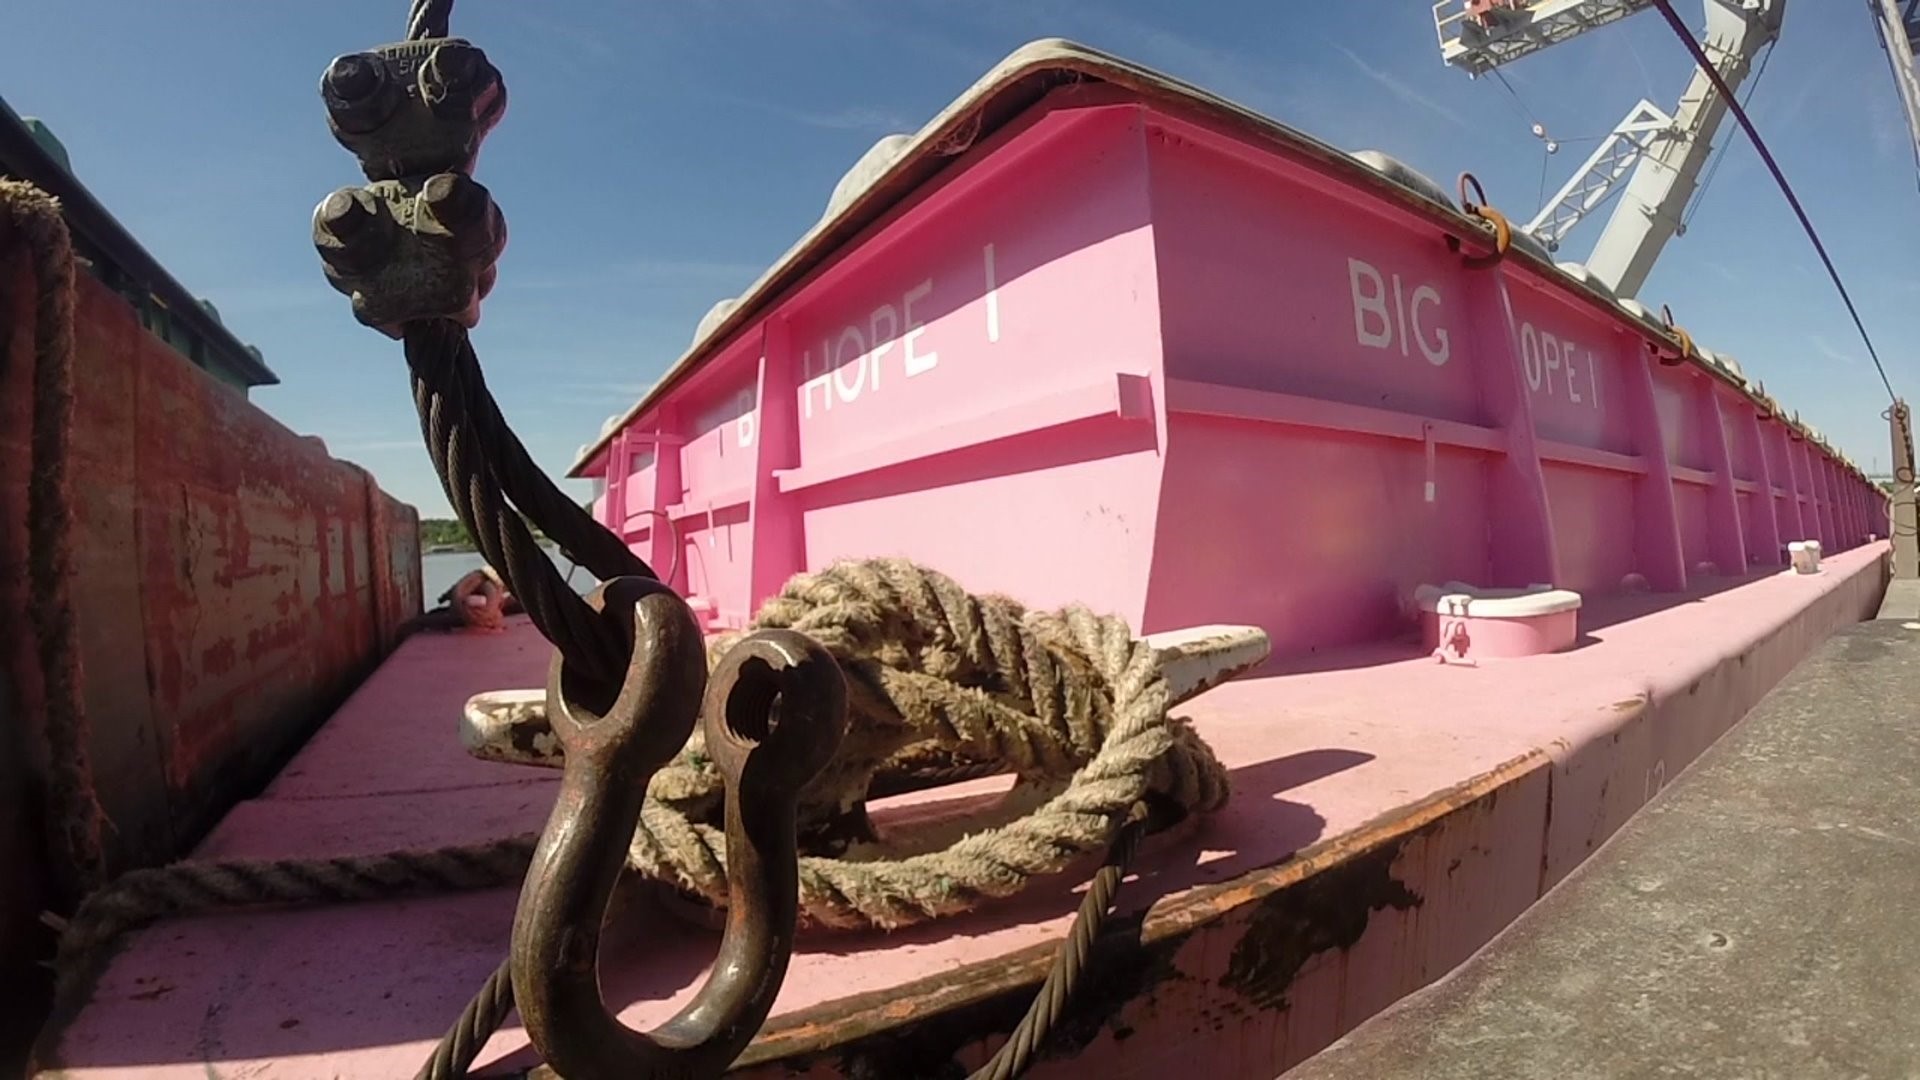 Pink barge makes a stop in Bettendorf